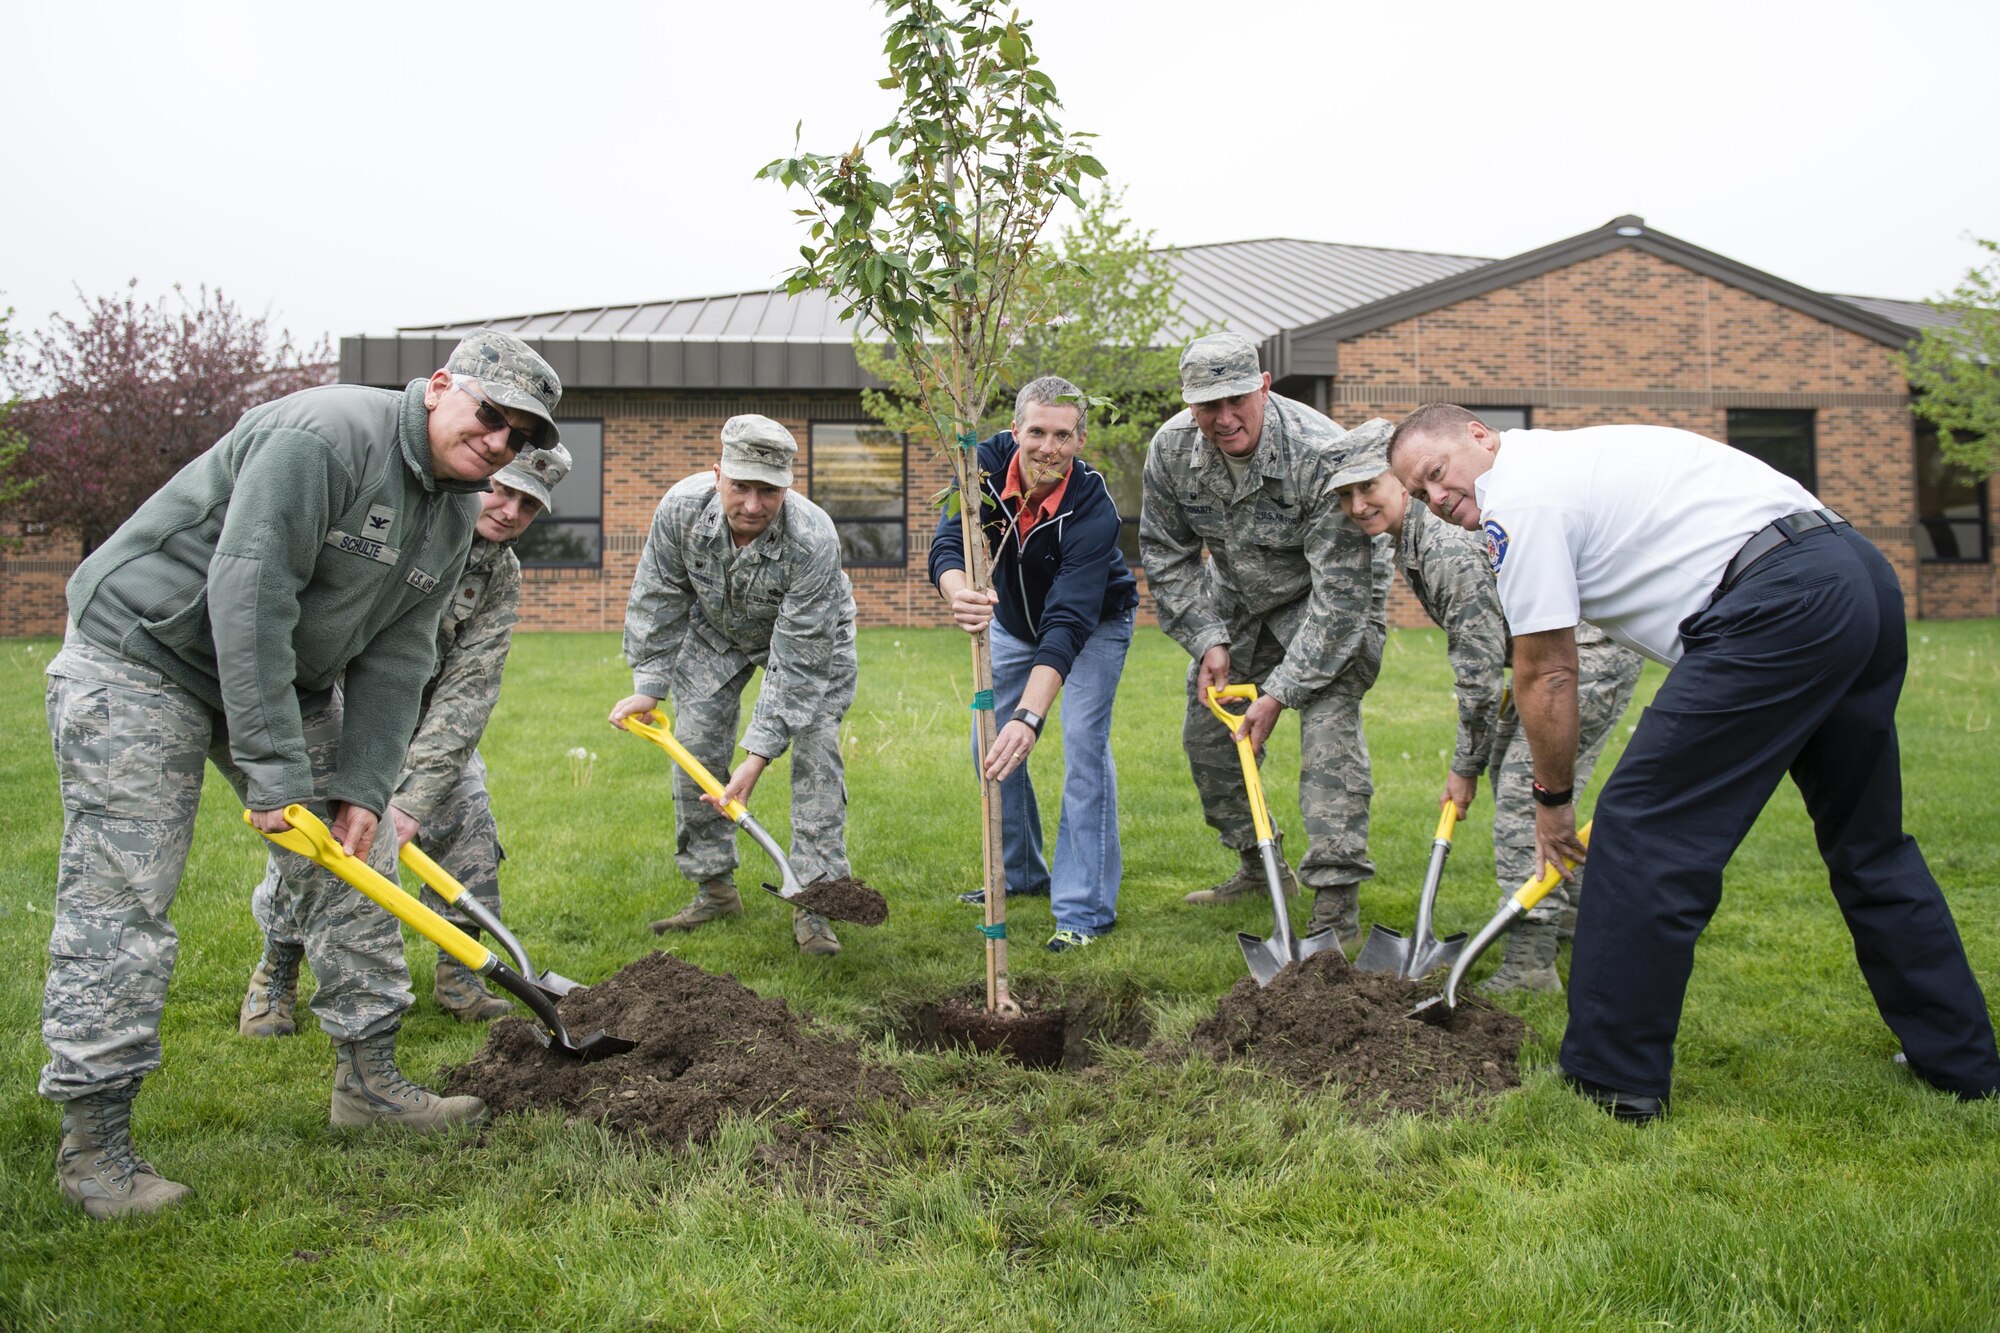 Grissom employees plant a Kwanzan cherry tree at Grissom Air Reserve Base, Ind., April. 29, 2016. From the left, they are Col. Anna Schulte, 434th Maintenance Group commander, Maj. Denney Neace, 434th Communications Squadron commander, Col. Scott Russell, 434th Mission Support Group commander, Cory Walters, 434th Civil Engineer Squadron biological scientist, Col. Doug Schwartz, 434th Air Refueling Wing commander, Col. Therese Kern, 434th Aerospace Medicine Squadron commander and John Ireland, Grissom fire chief. (U.S. Air Force photo/Tech. Sgt. Benjamin Mota) 